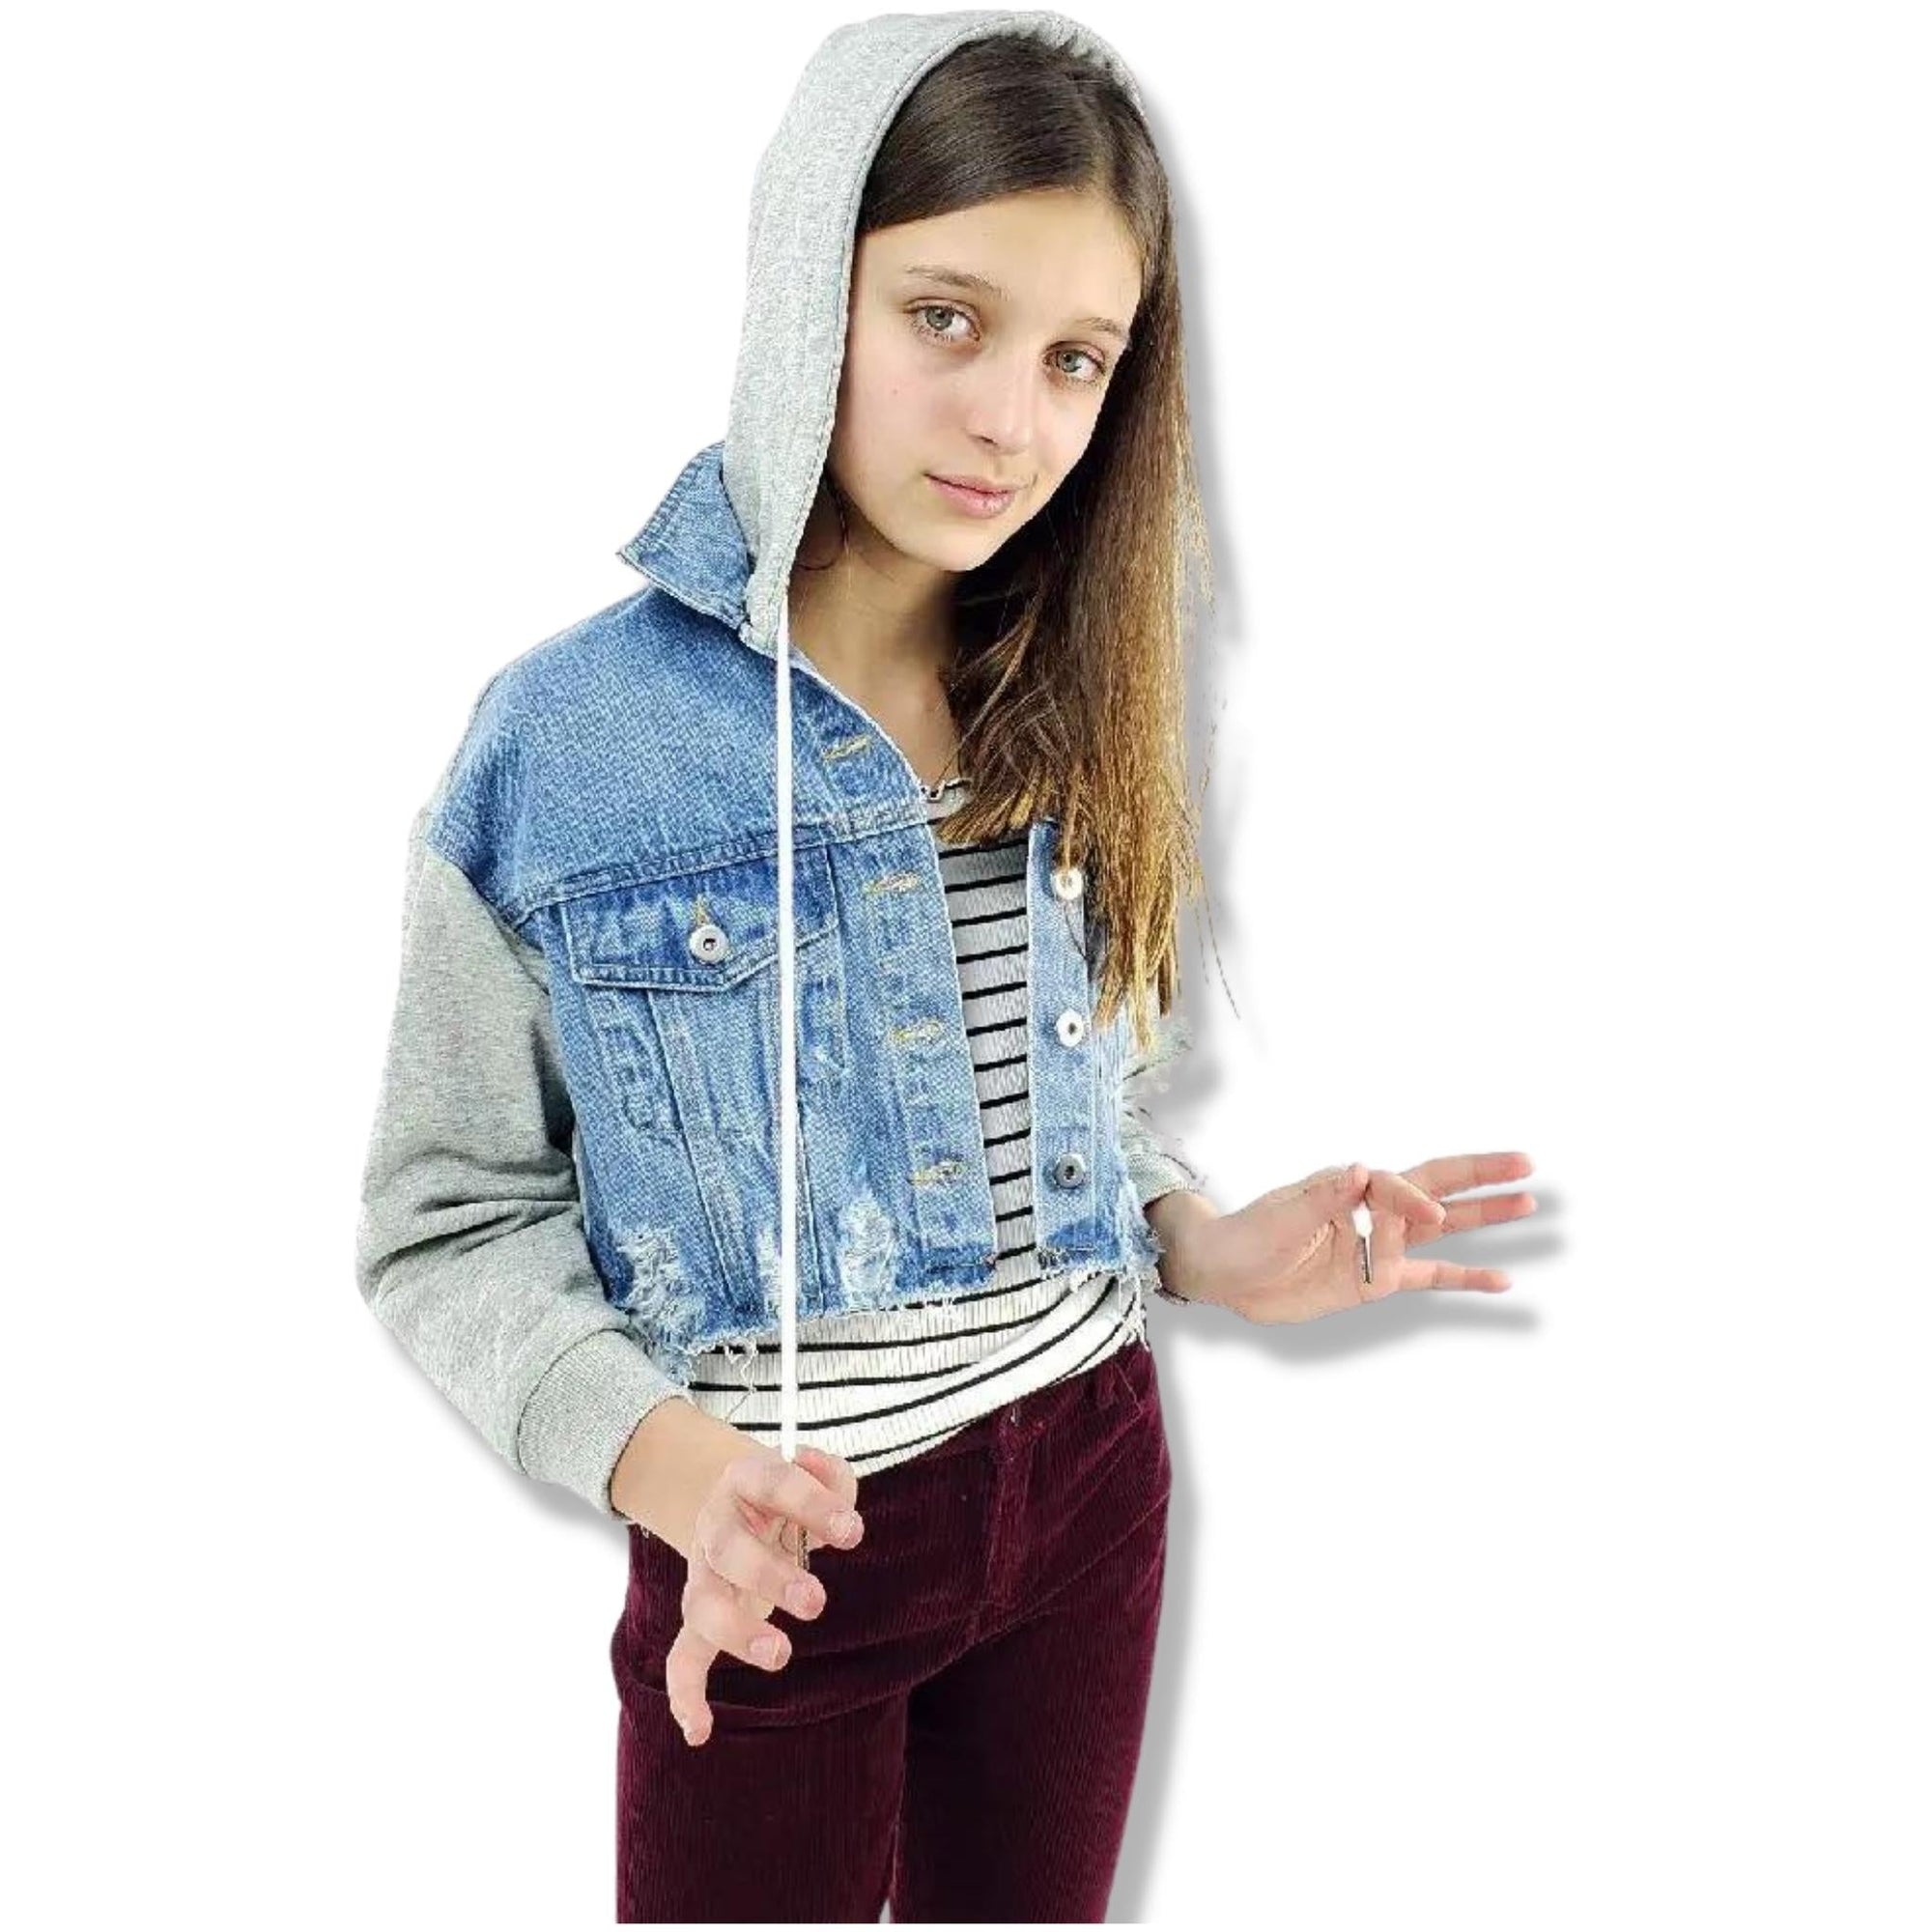 Tractr Indigo Crop Denim Jacket Combo With French Terry Sleeves - a Spirit Animal - Jacket $60-$75 $60-$90 active Apr 2022